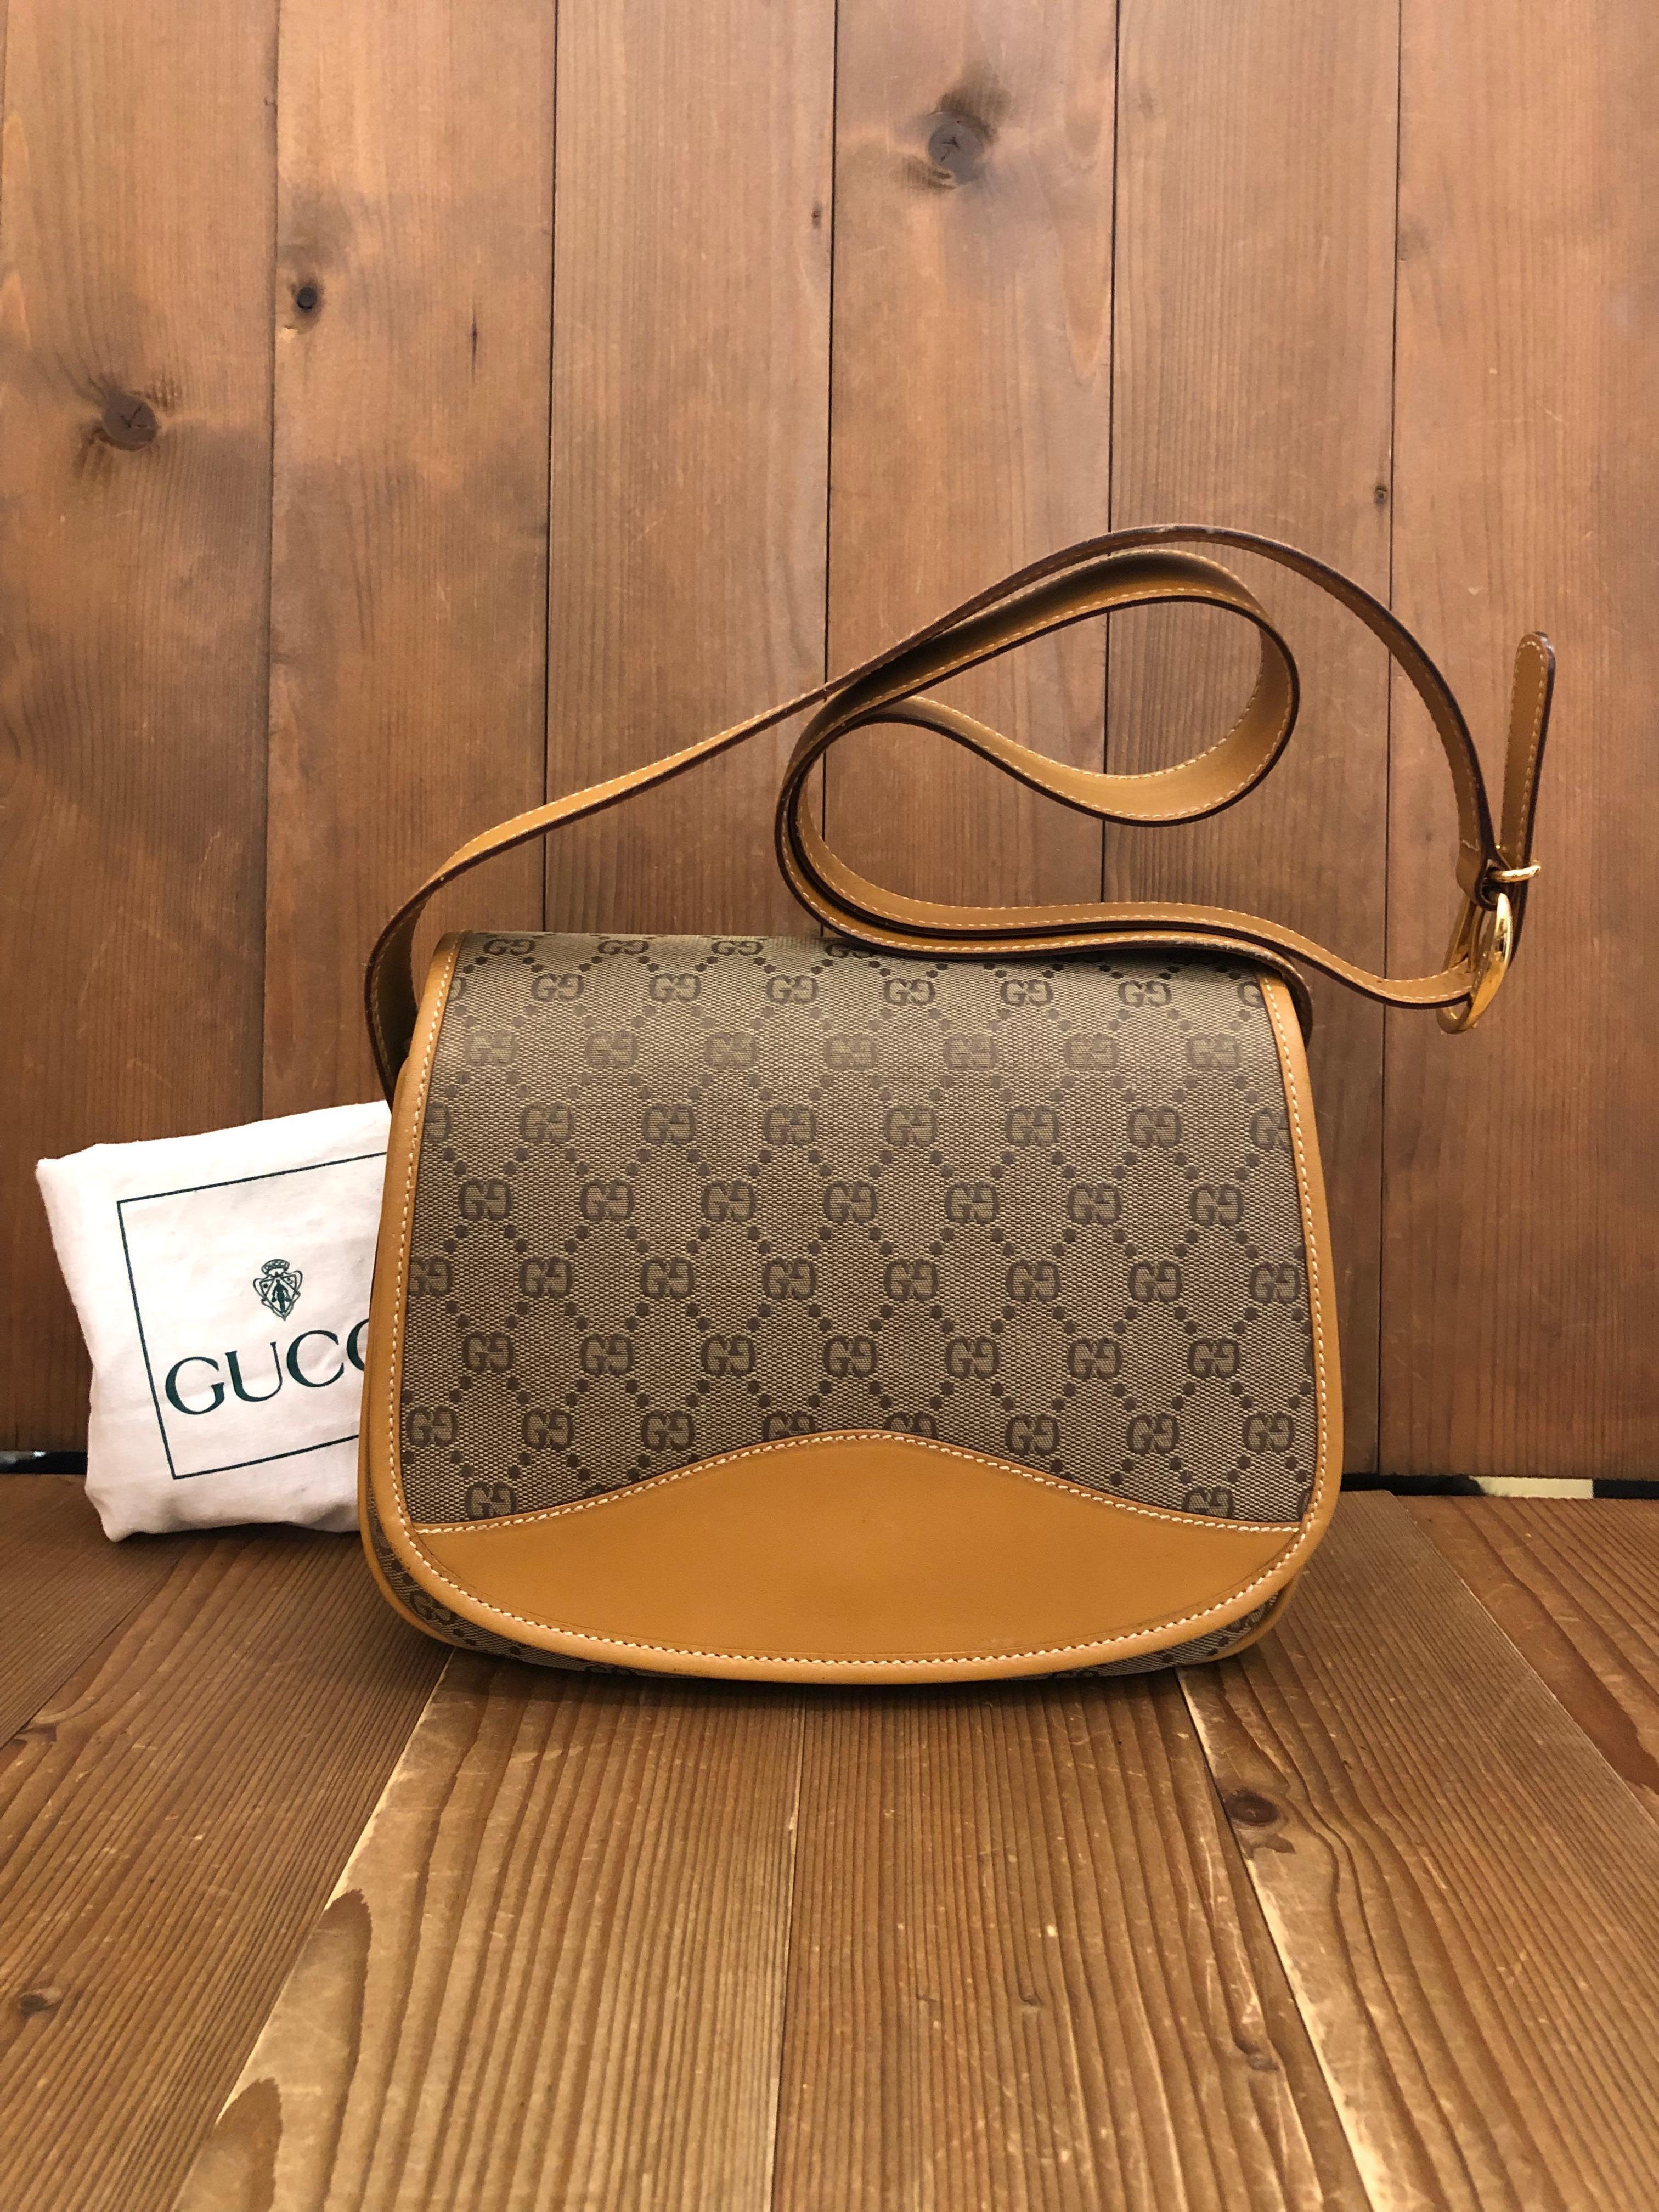 This Vintage GUCCI shoulder bag is crafted of GG jacquard in khaki trimmed with brown smooth leather. Front flap magnetic snap closure opens to new beige interior featuring three compartments and a zippered pocket. Made in Italy. Measures